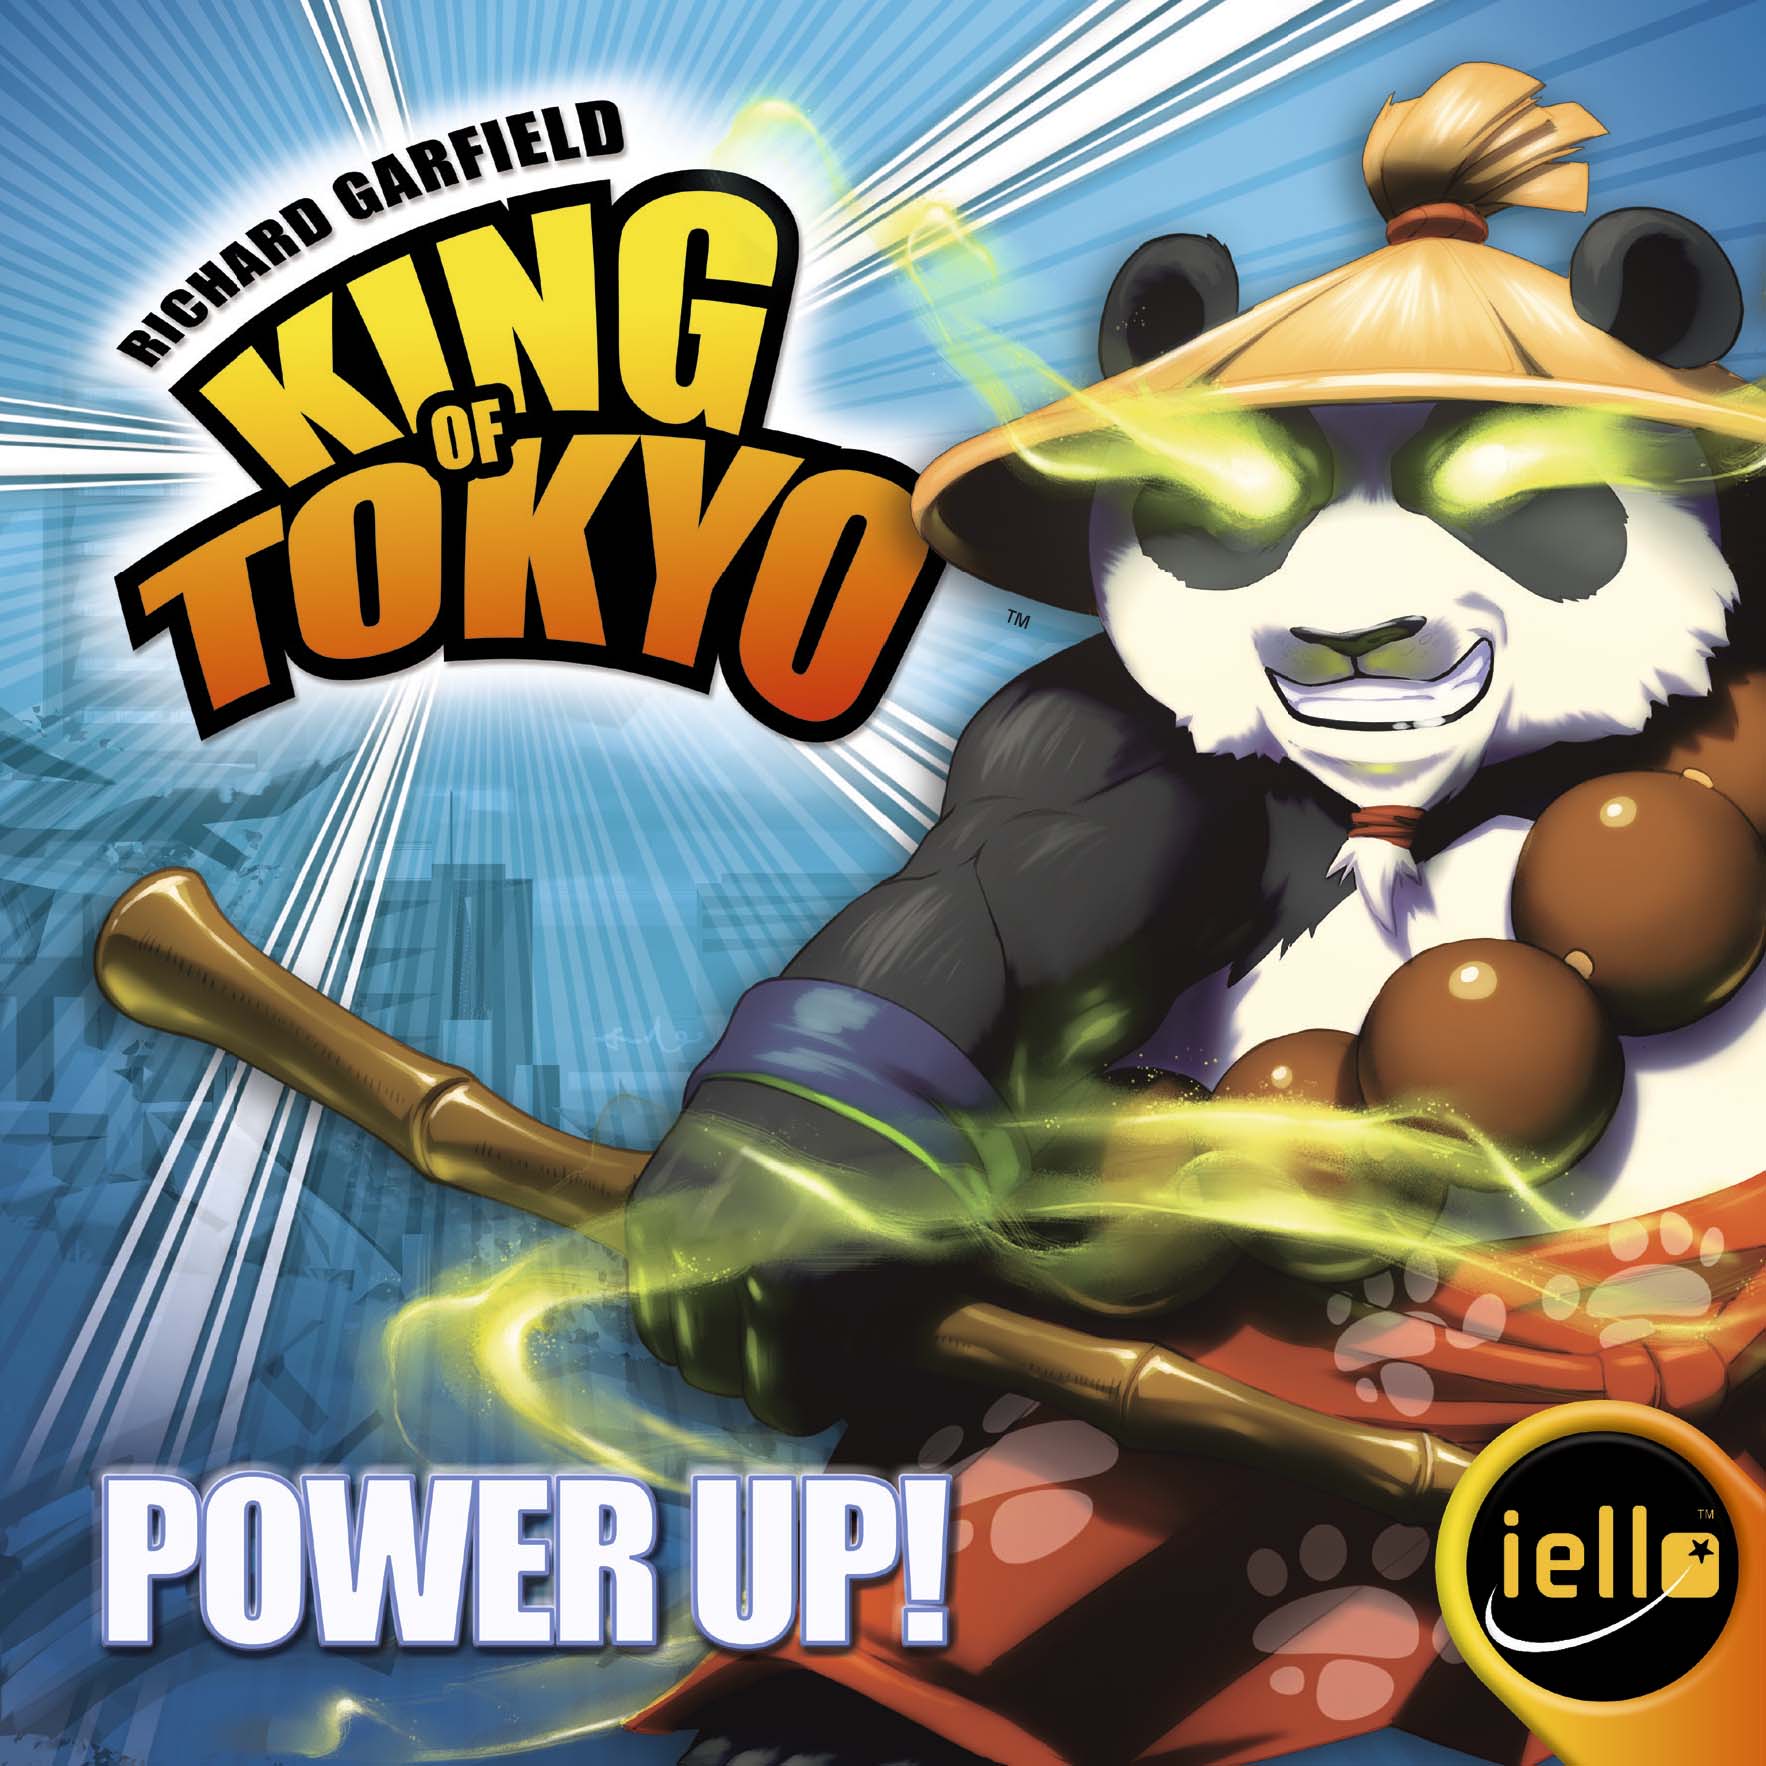 King of Tokyo: Power Up! und Monster Pack - Cthulhu